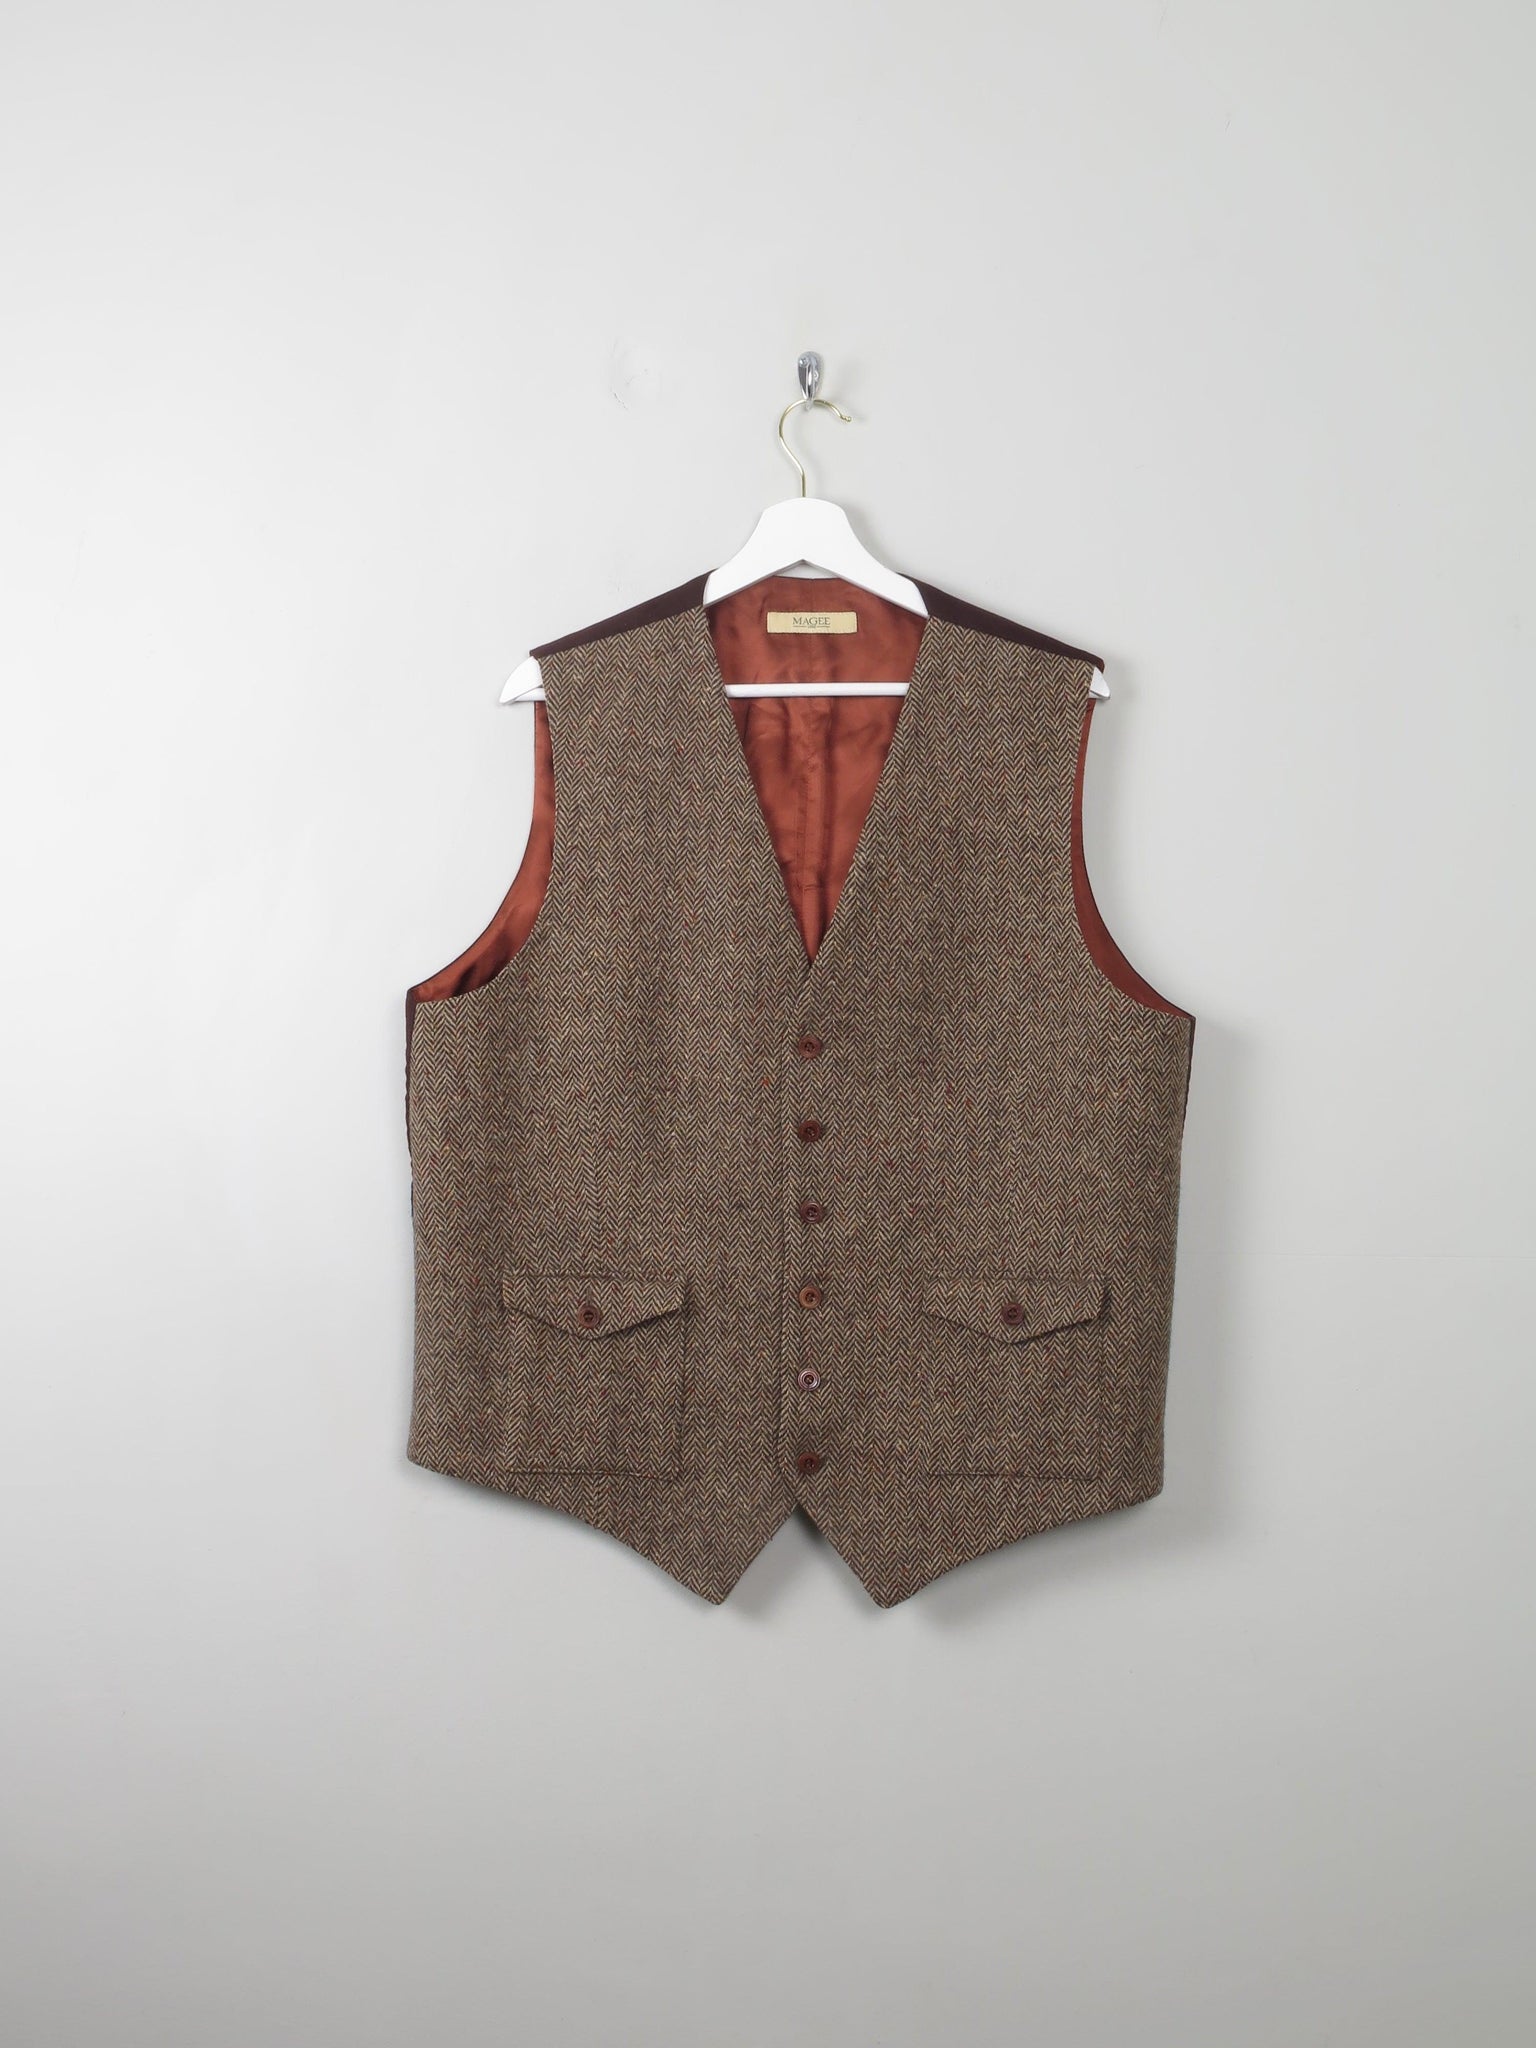 Mens Vintage Style Donegal Tweed Waistcoat XL 44/46 - The Harlequin